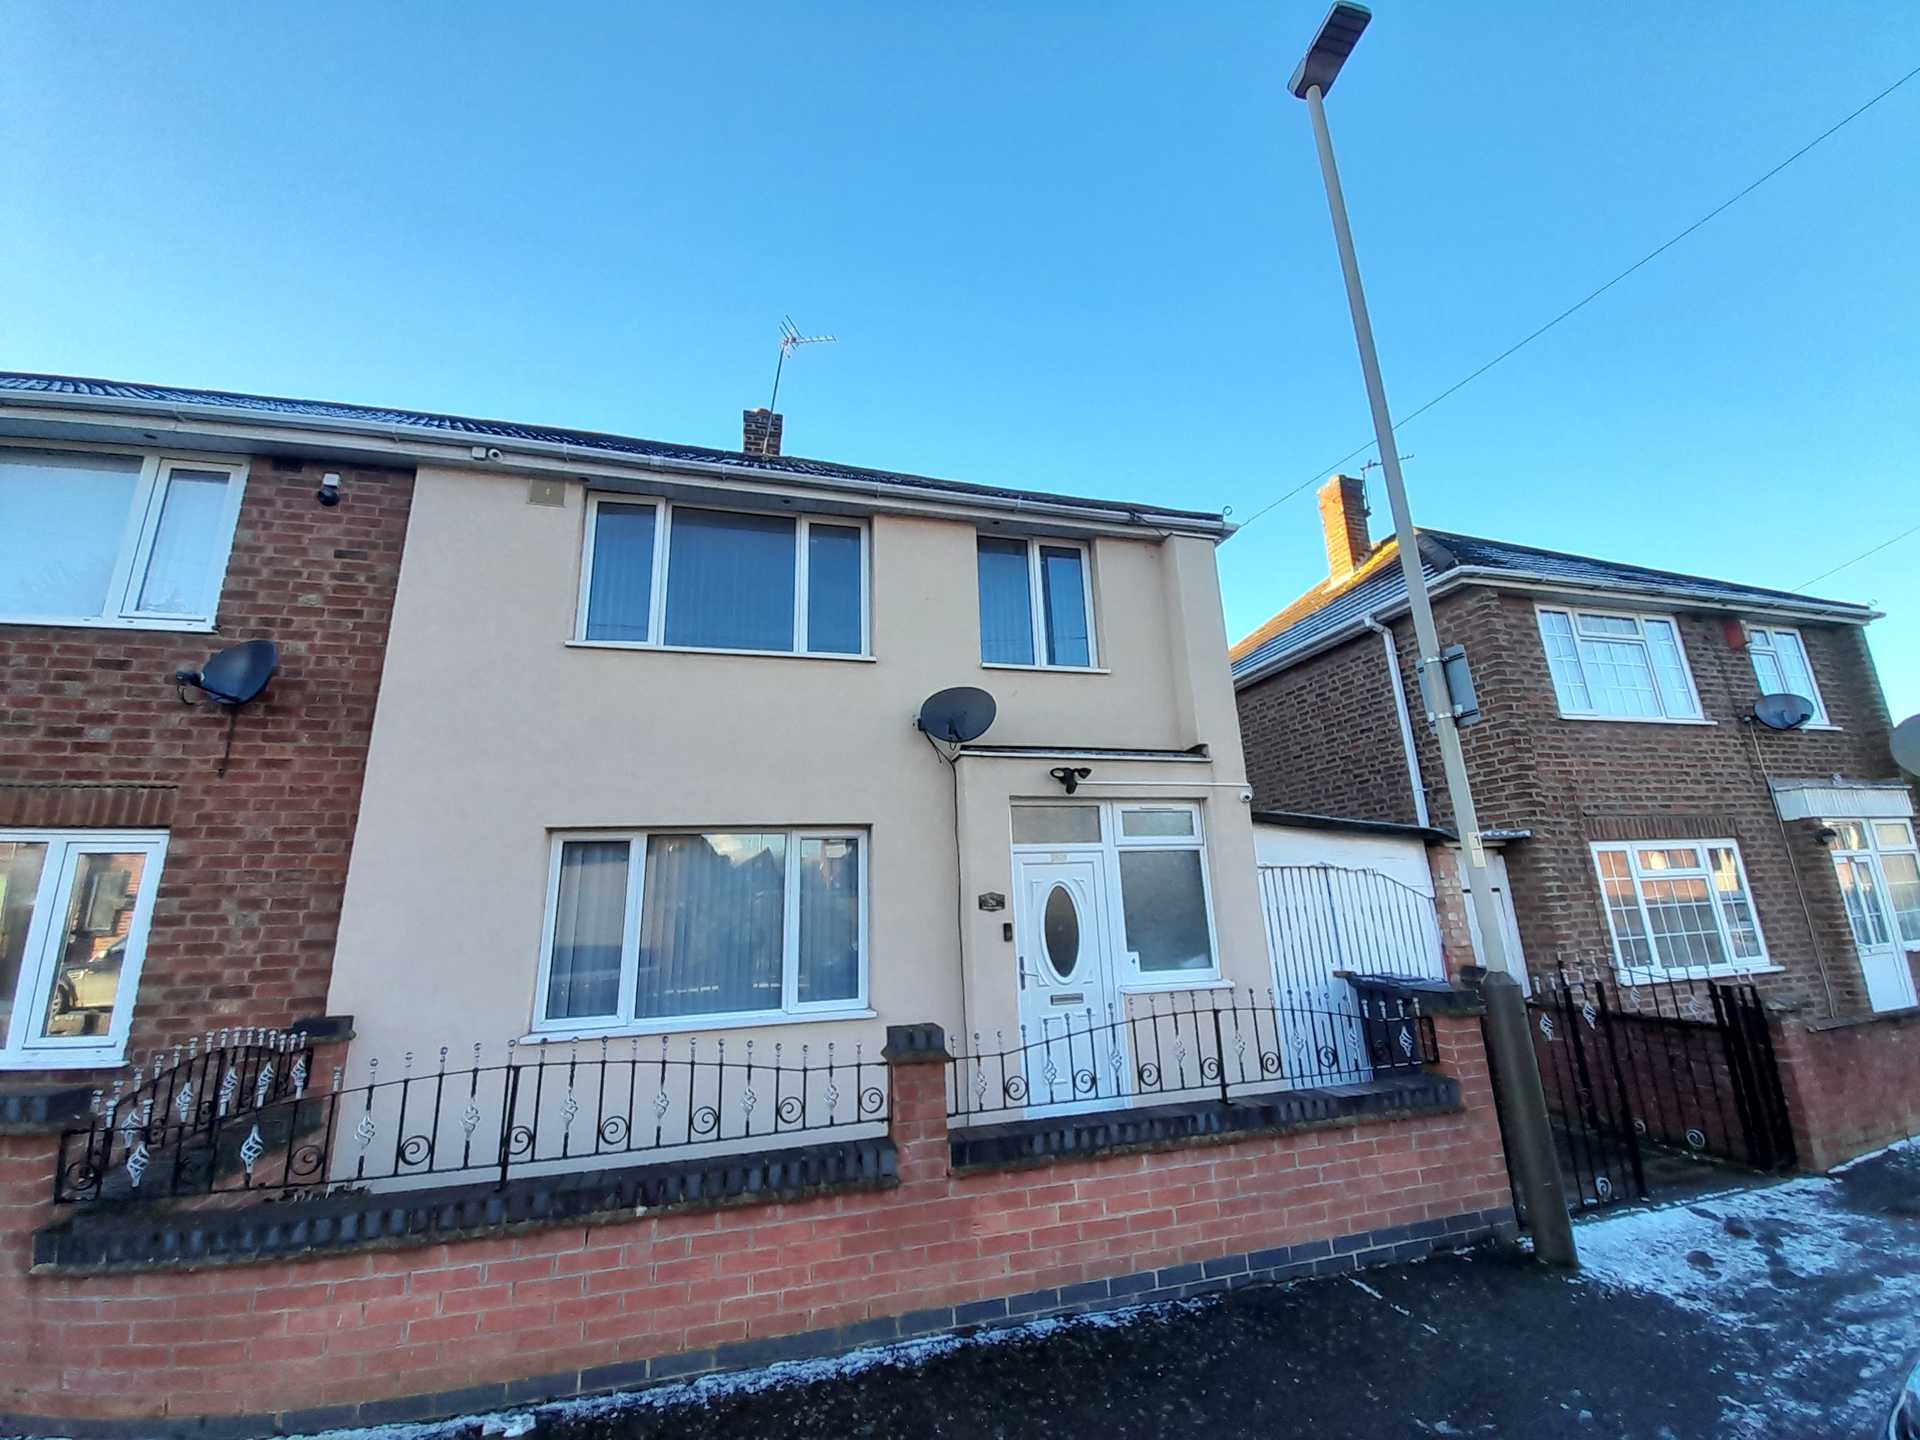 House in Belgrave, Leicester 11390756